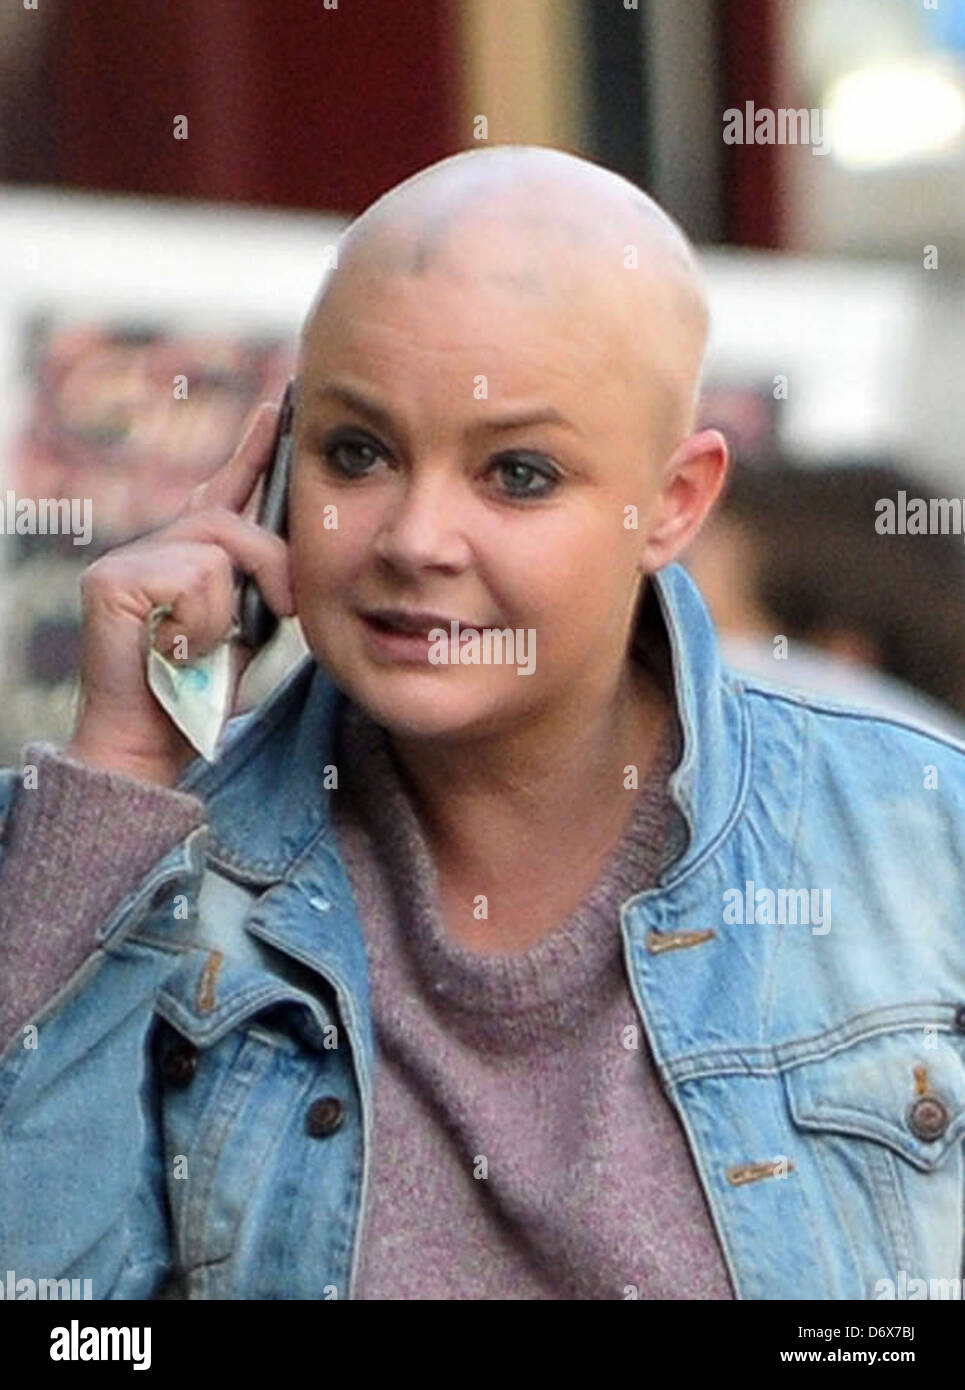 Gail Porter out and about in <b>Primrose Hill</b> London, England - 08.03.12 Stock - gail-porter-out-and-about-in-primrose-hill-london-england-080312-D6X7BJ